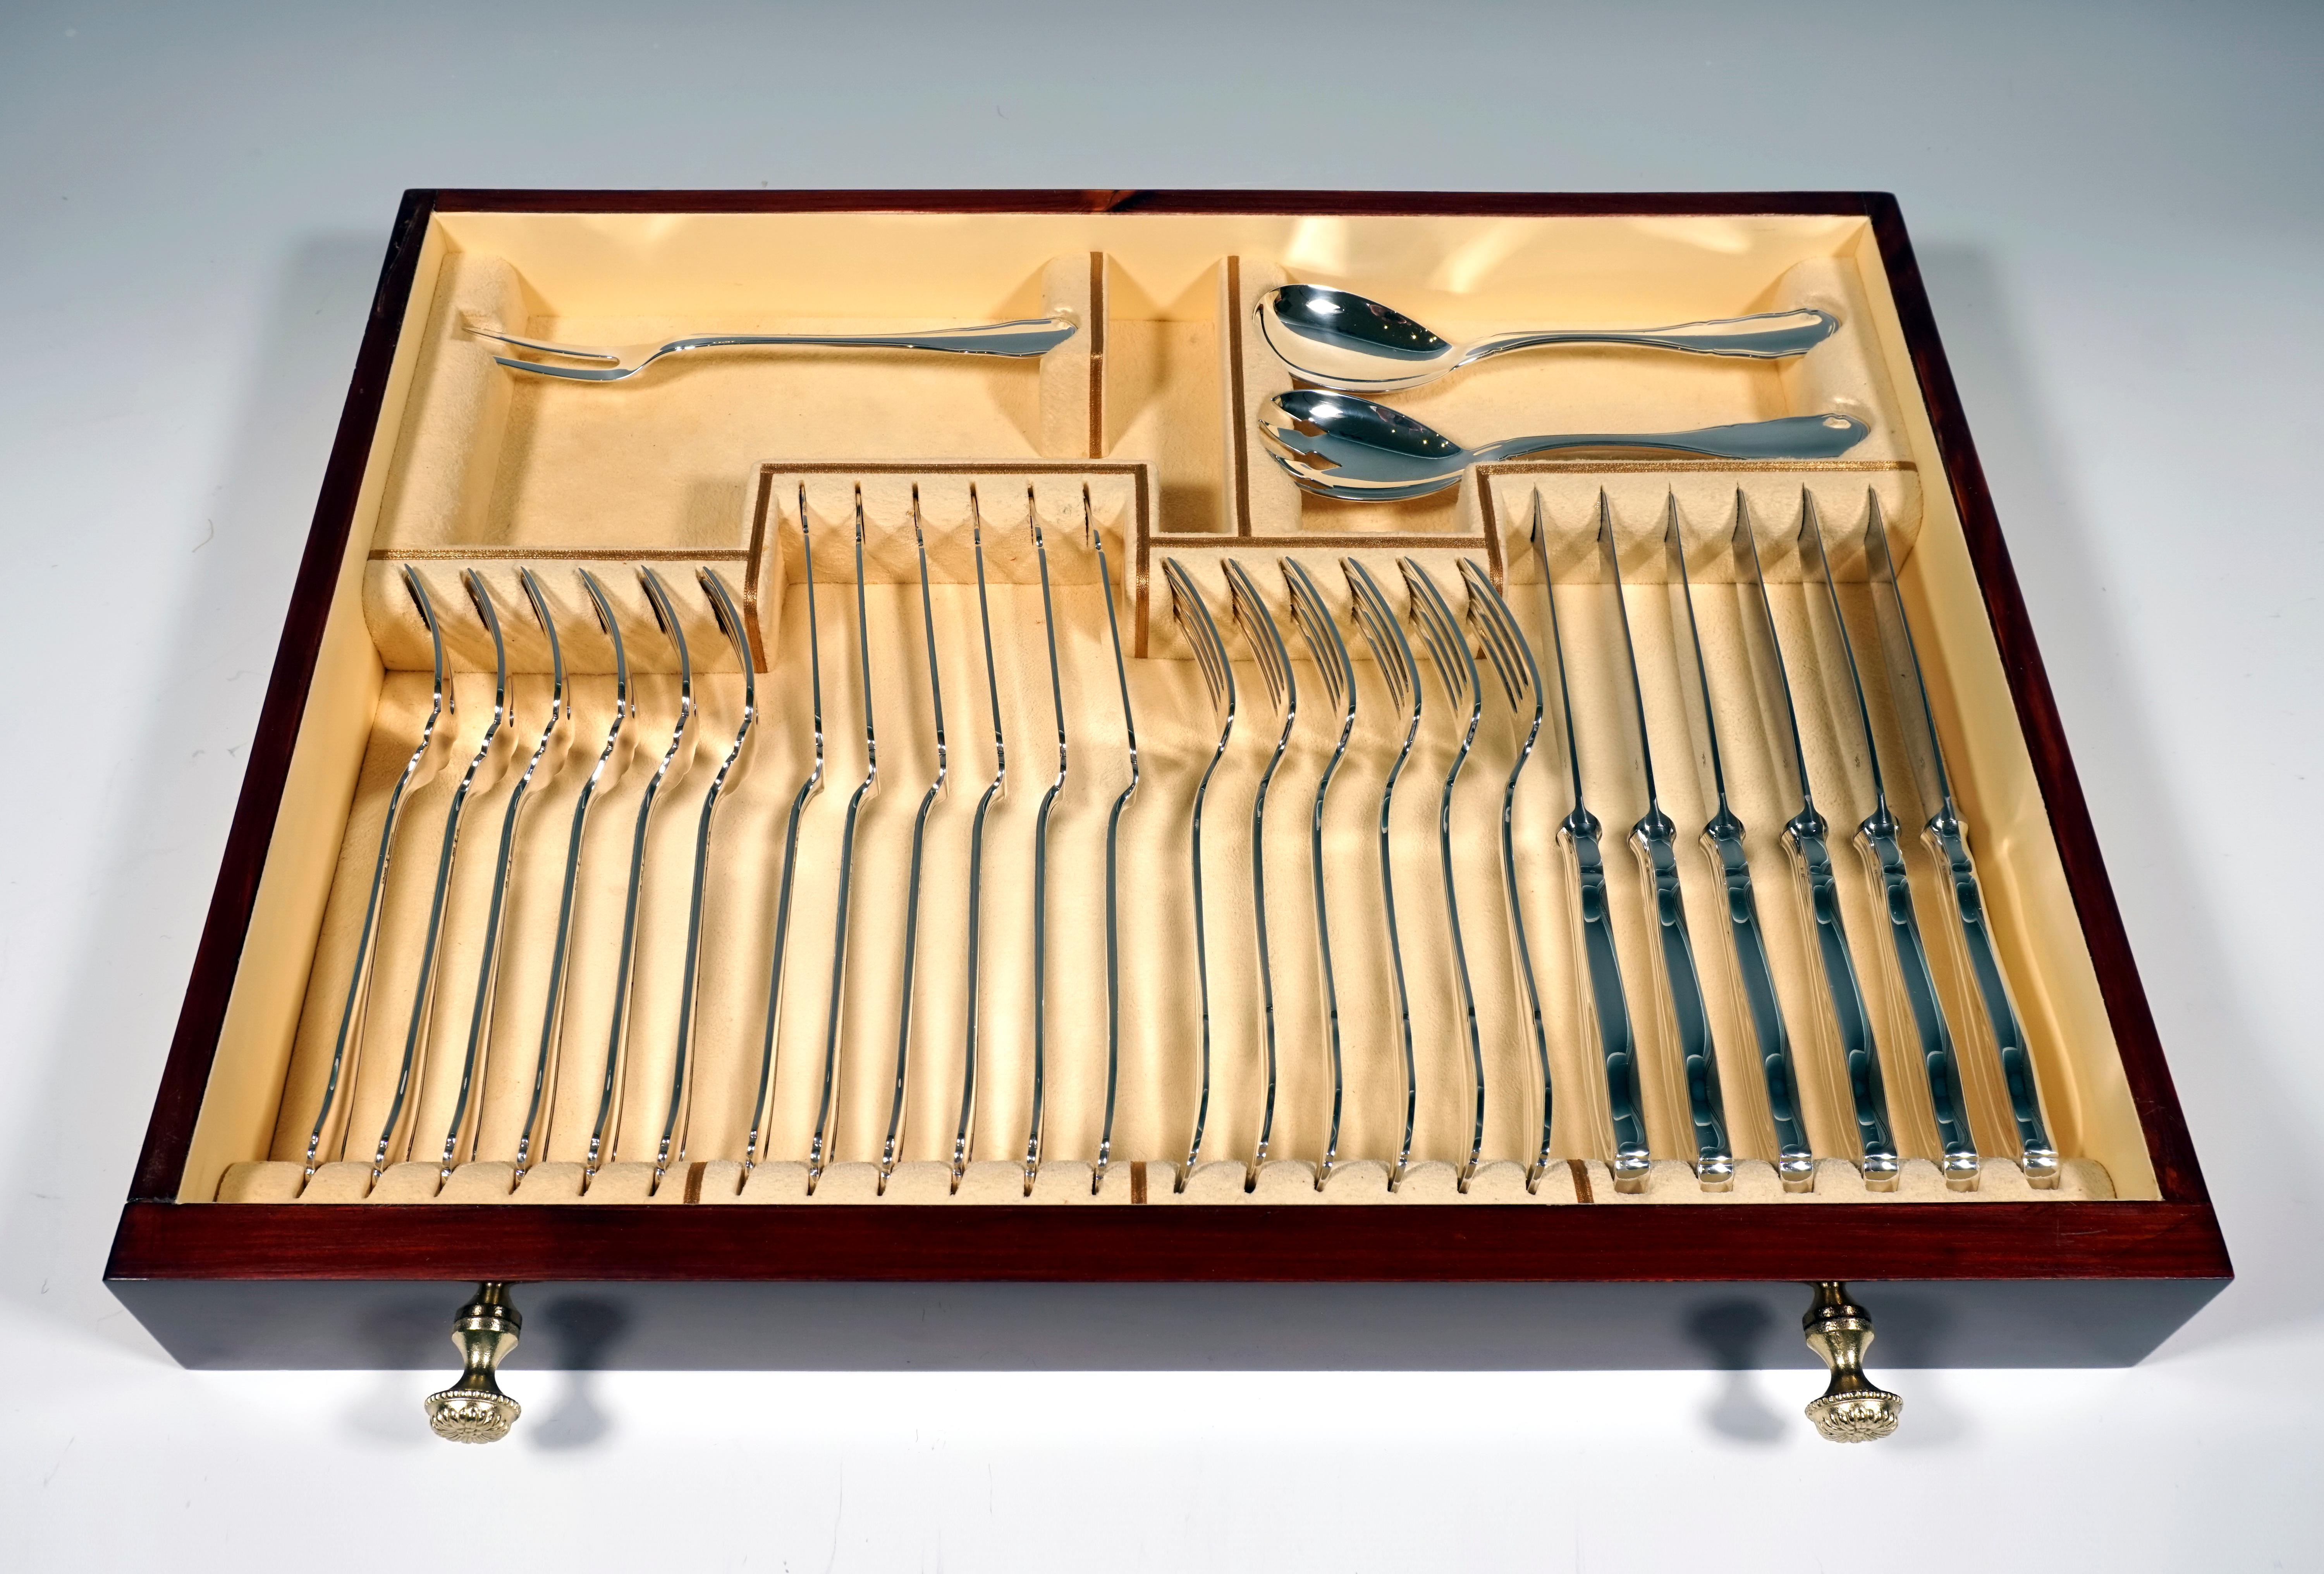 Hand-Crafted Art Deco Silver Cutlery Set For 6 People in Showcase, Germany & Vienna, ca 1925